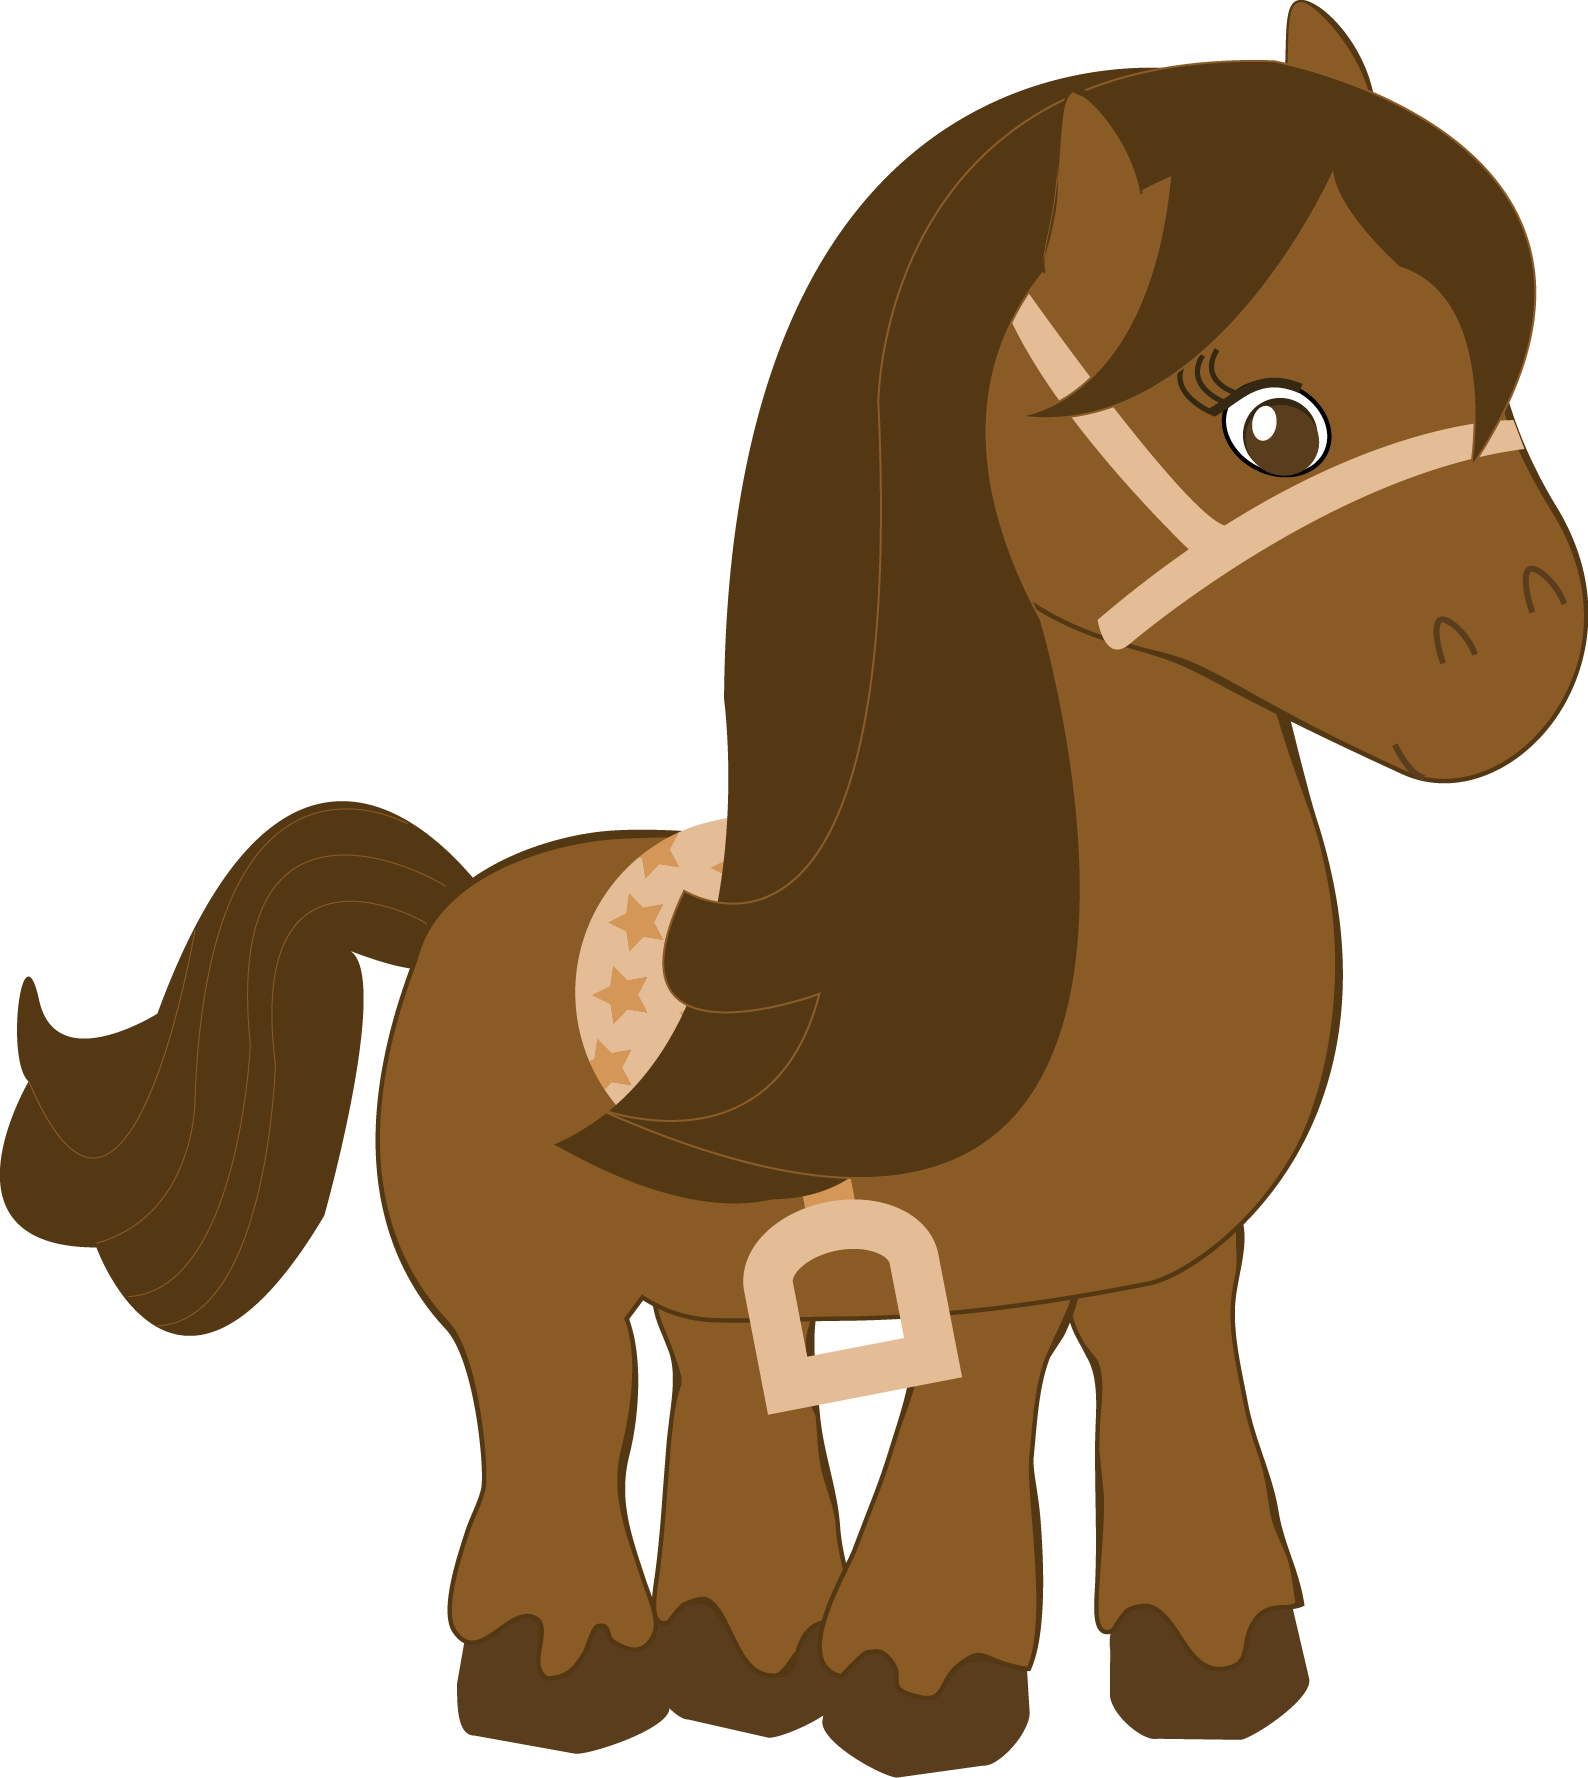 Ibbaeyuqmf px png gifts. Clipart ear horse